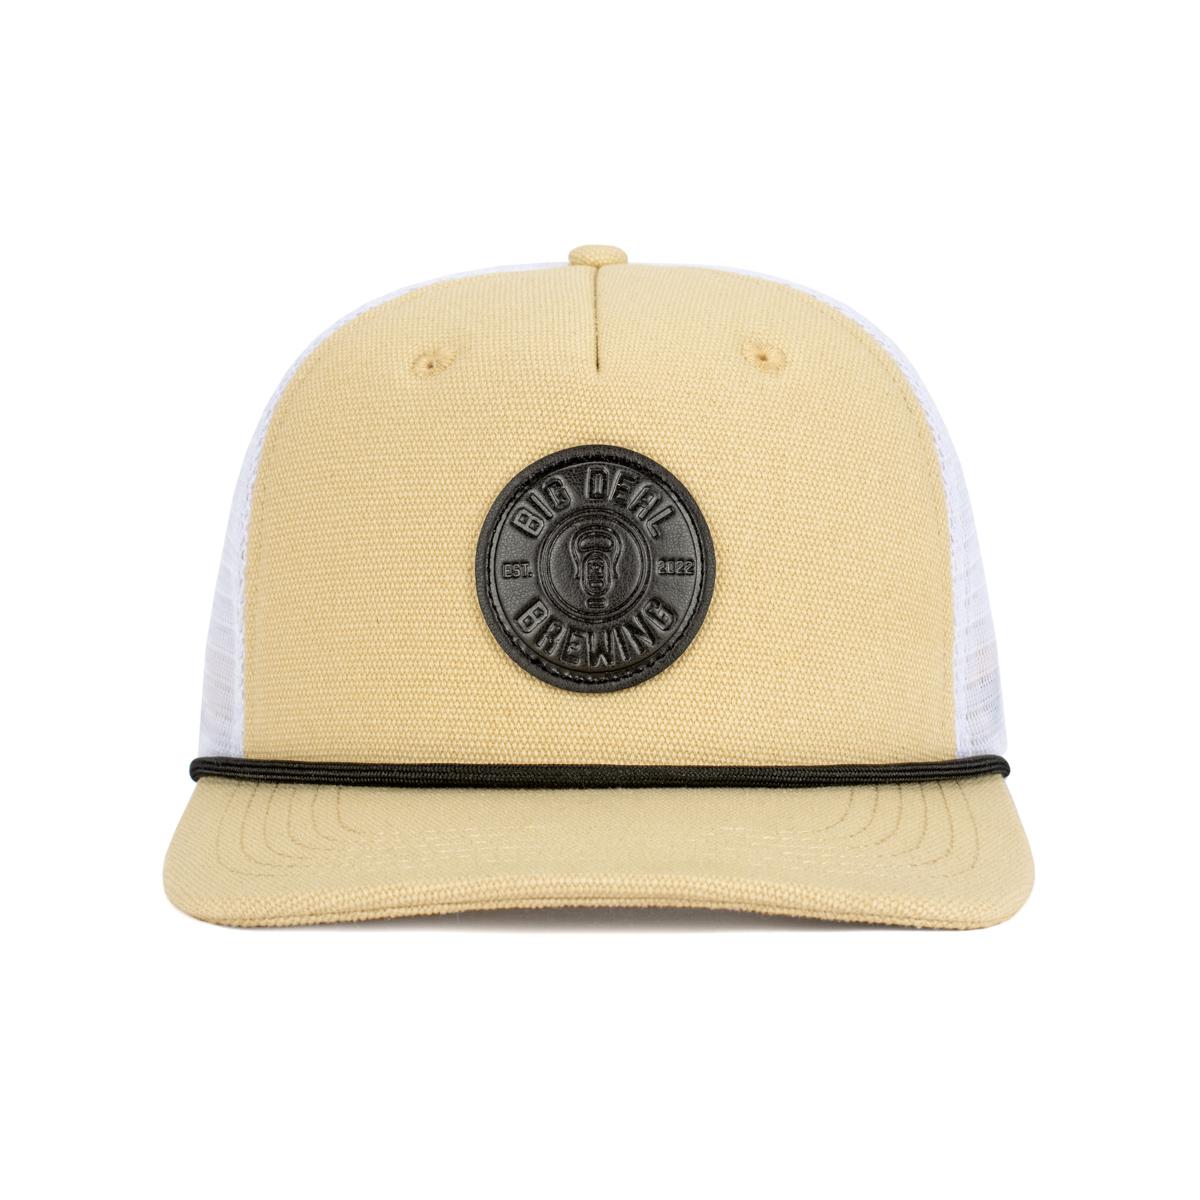 Big Deal Brewing Leather Patch Trucker Hat-Hats-Big Deal Brewing-Tan-One Size-Barstool Sports